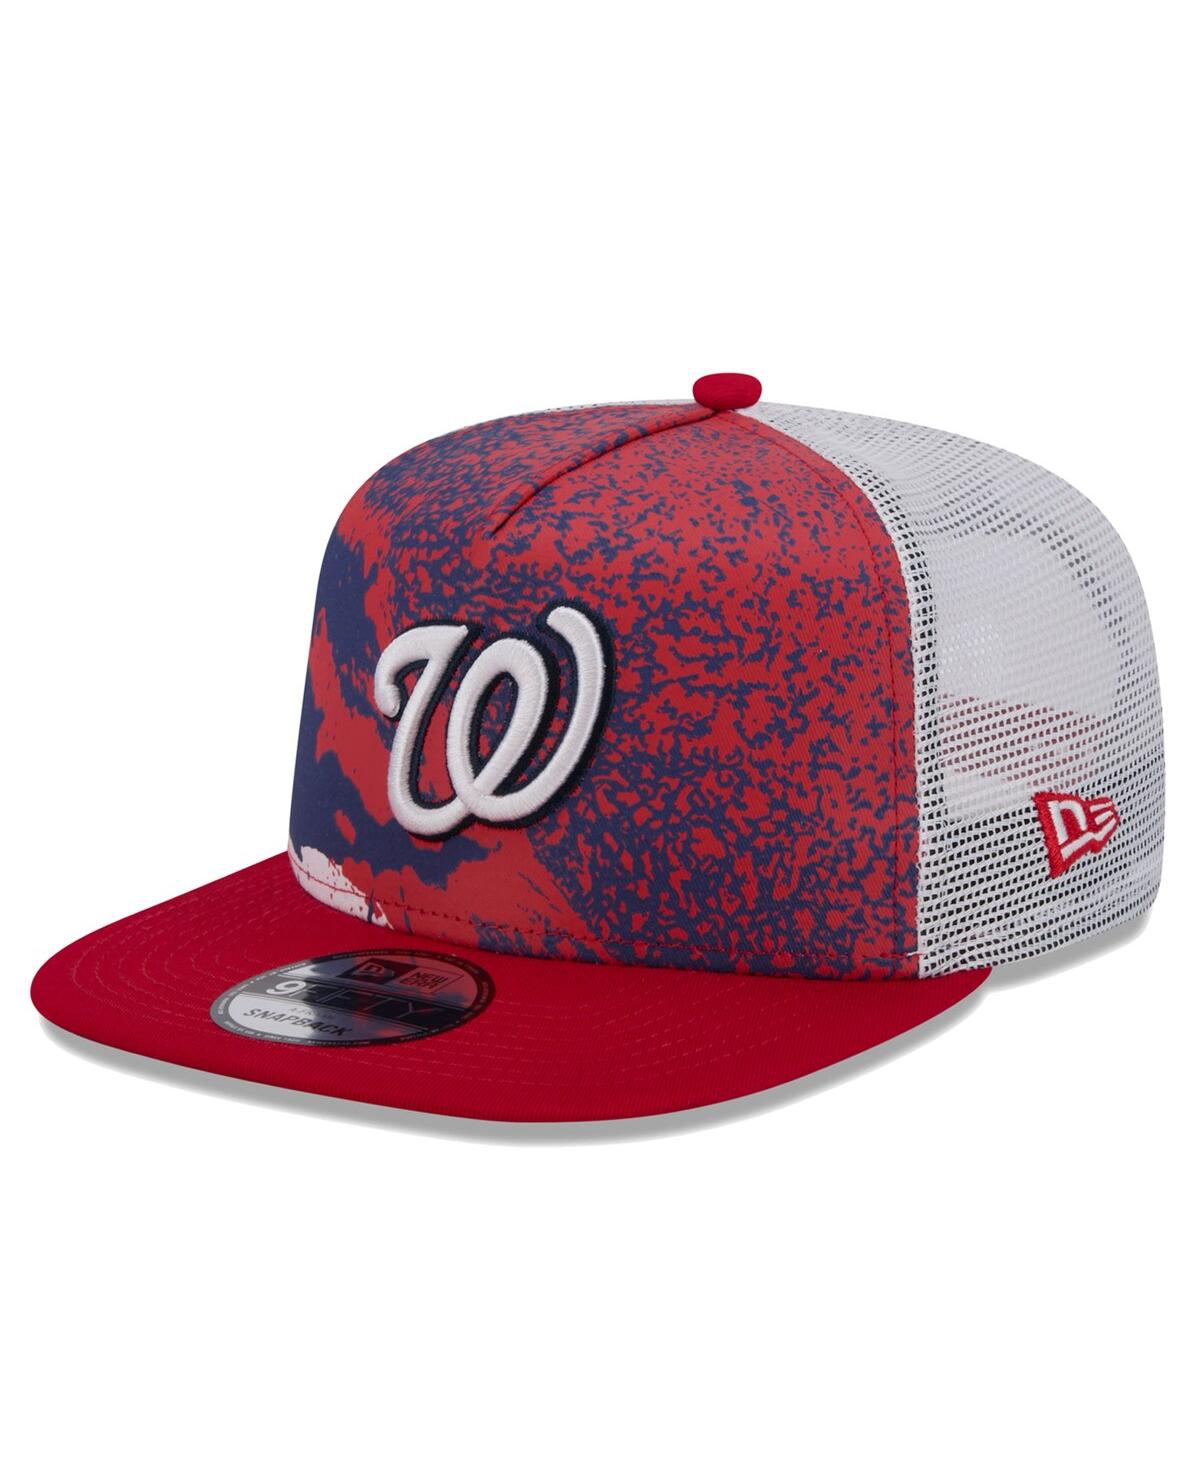 Men's Red Washington Nationals Court Sport 9Fifty Snapback Hat - Red